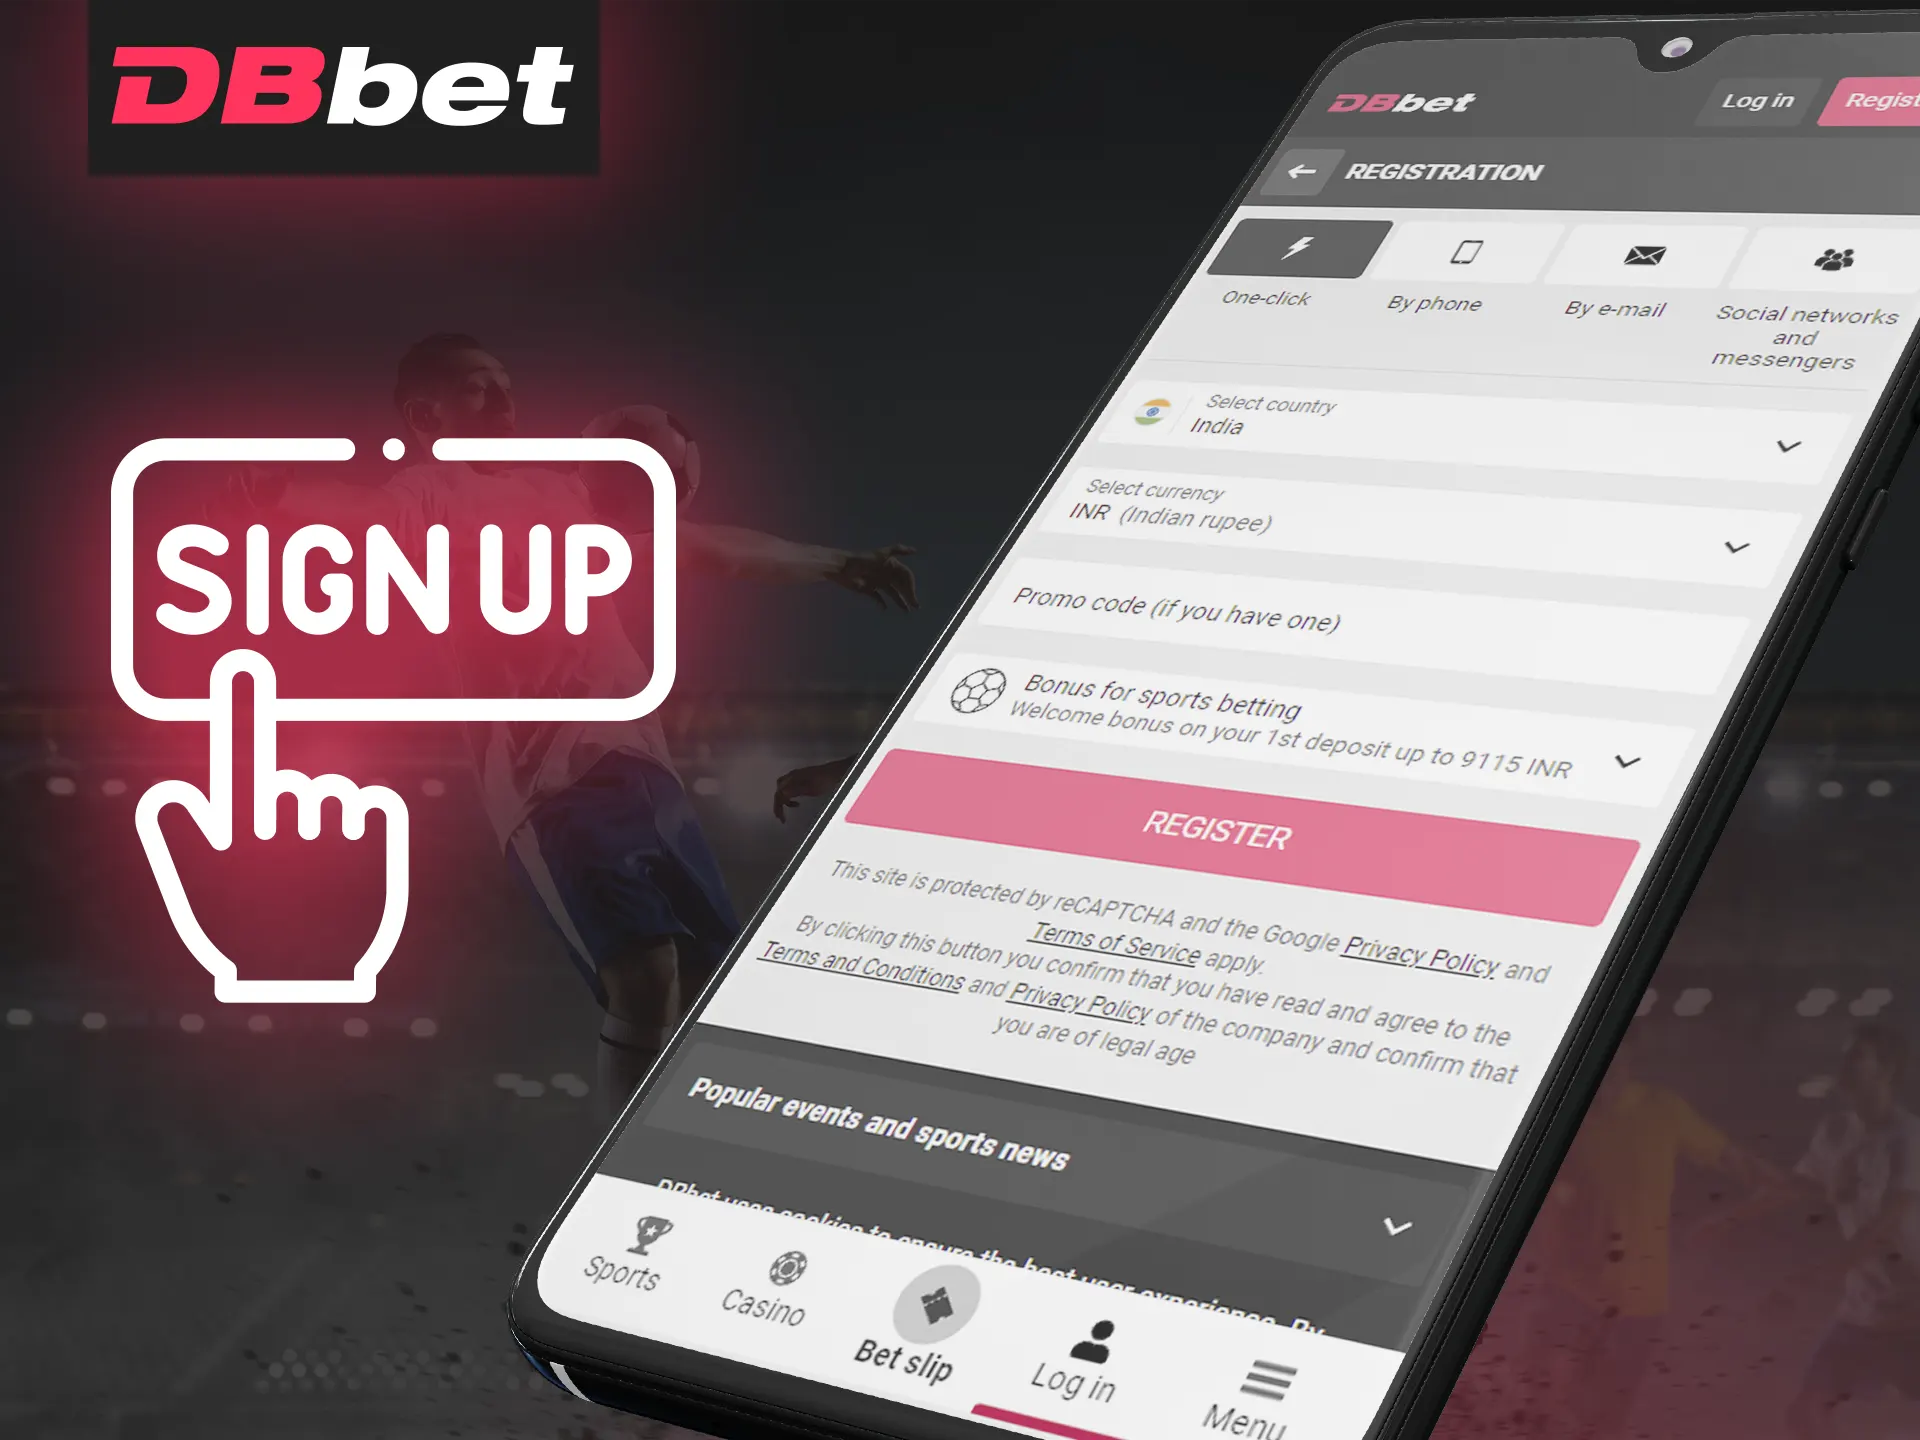 Complete a simple registration on the DBBet.